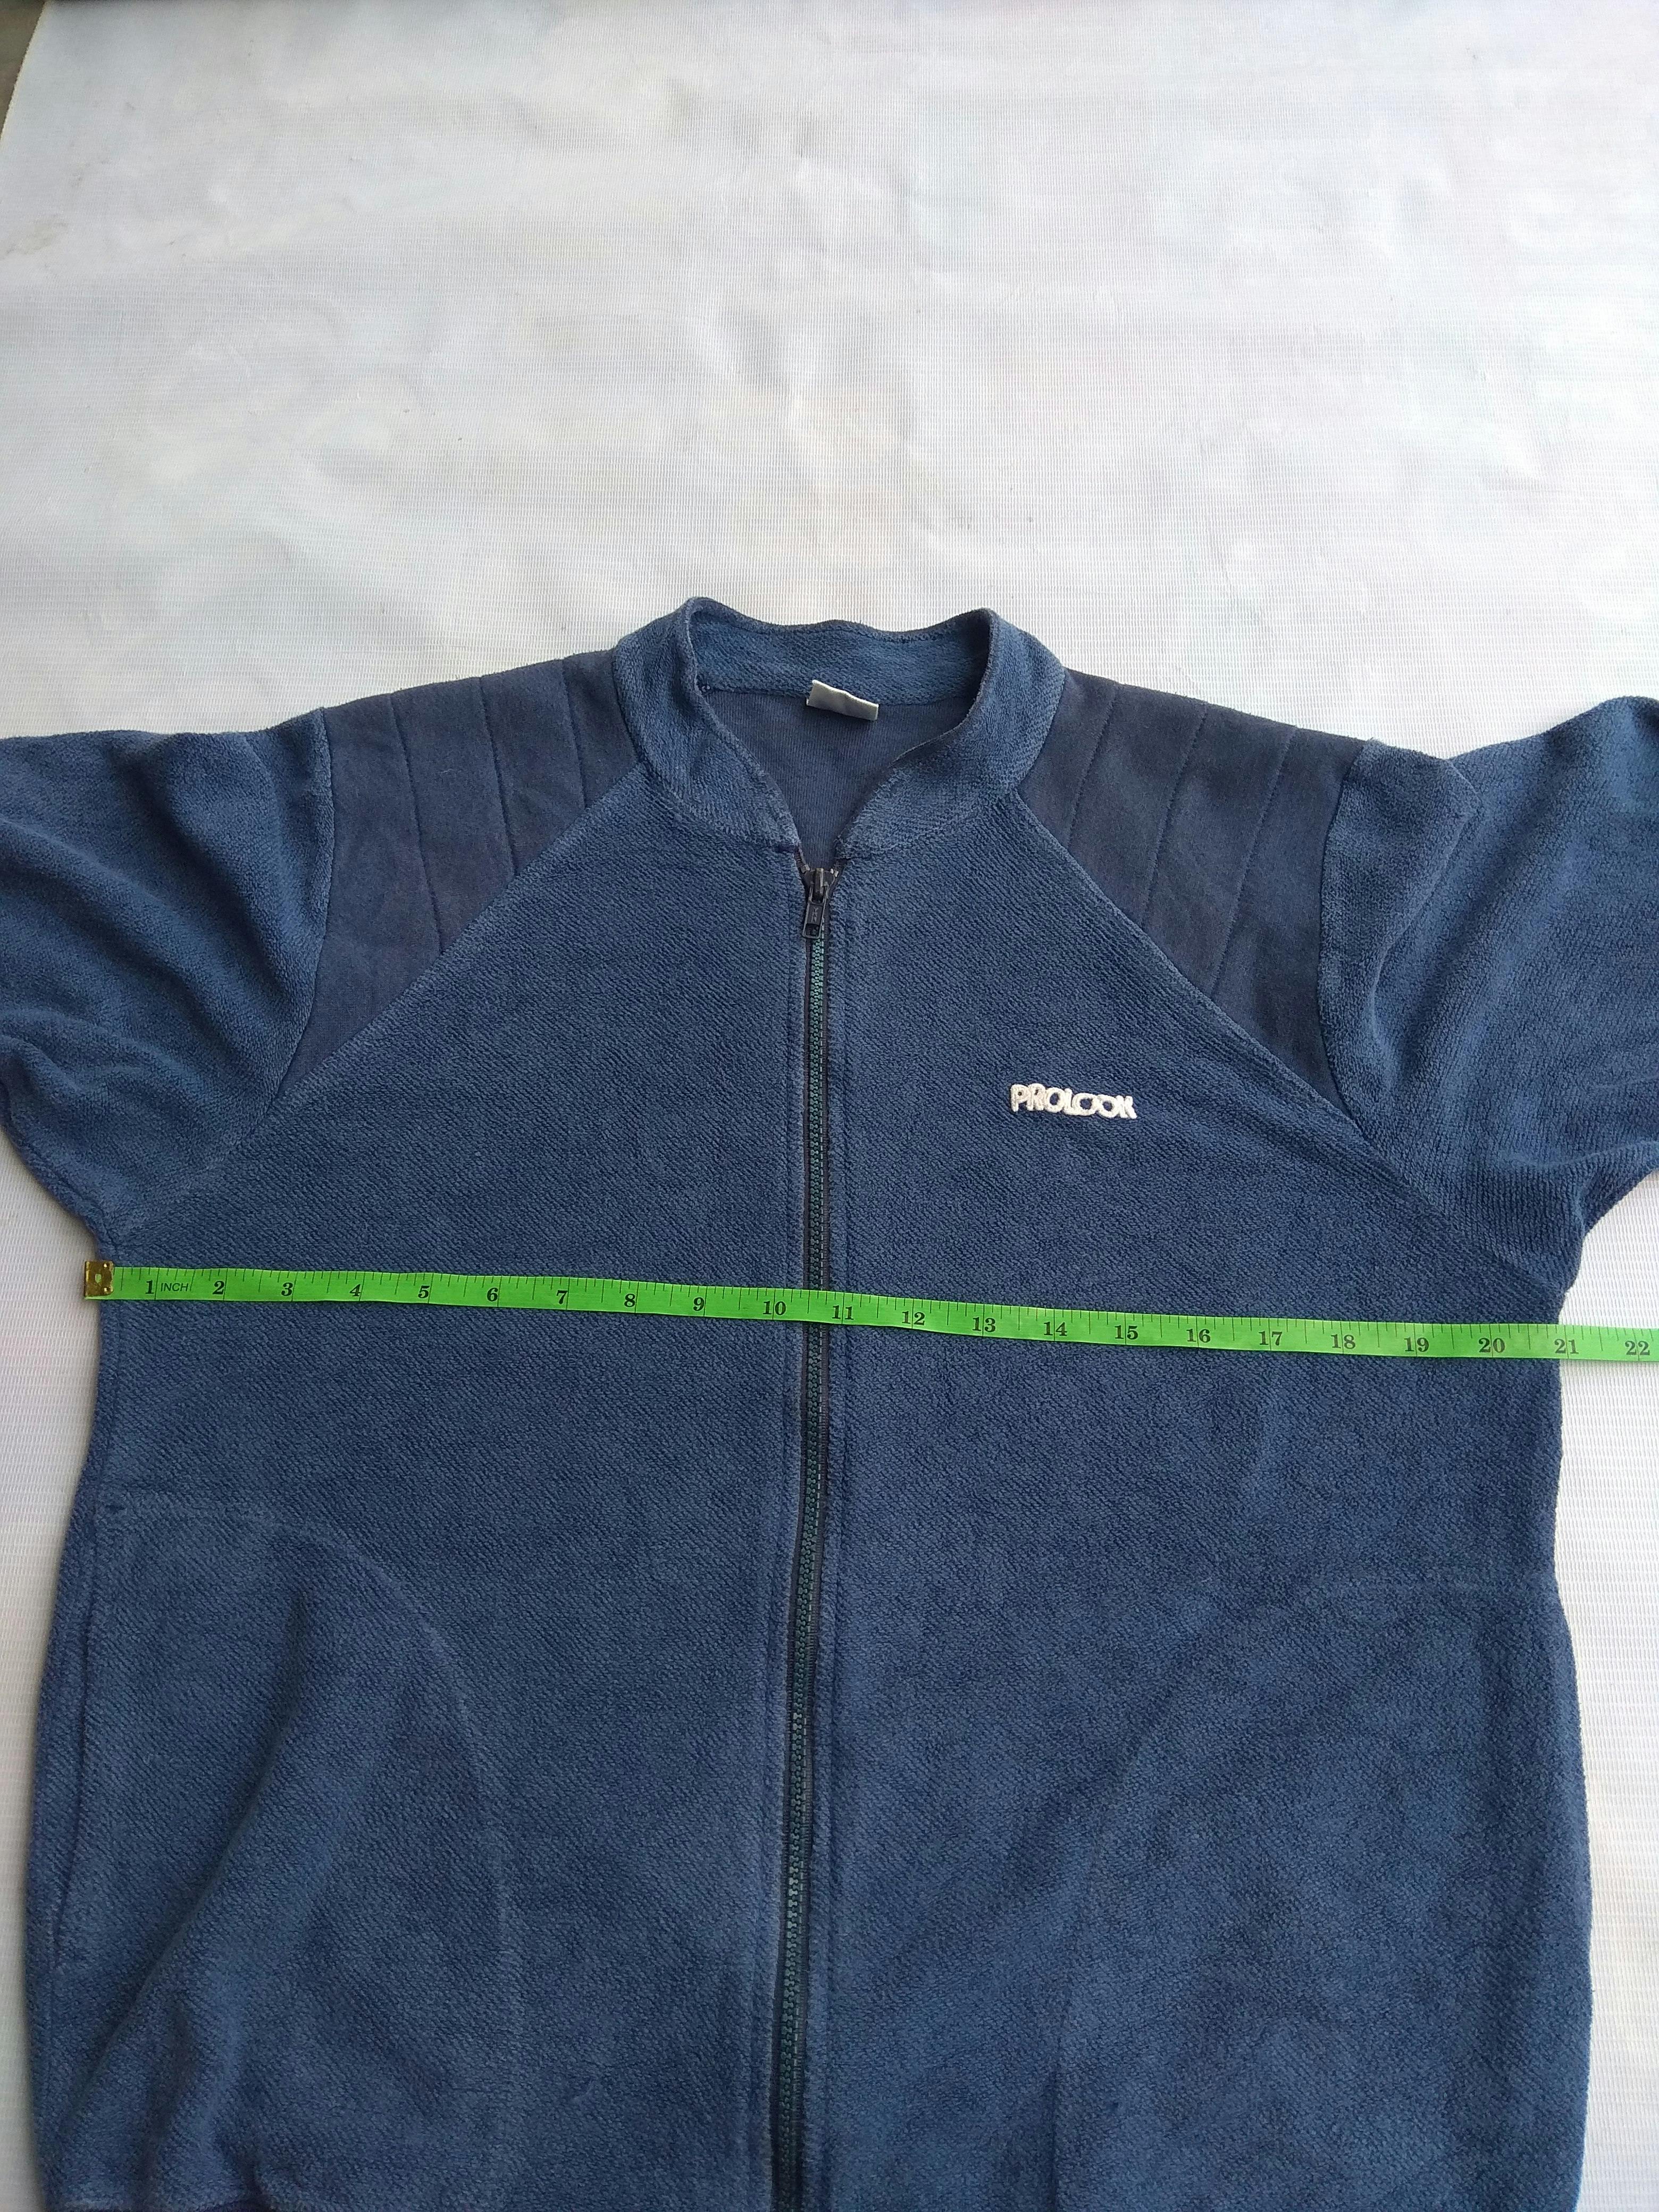 asics prolook blue jacket made in japan - 7